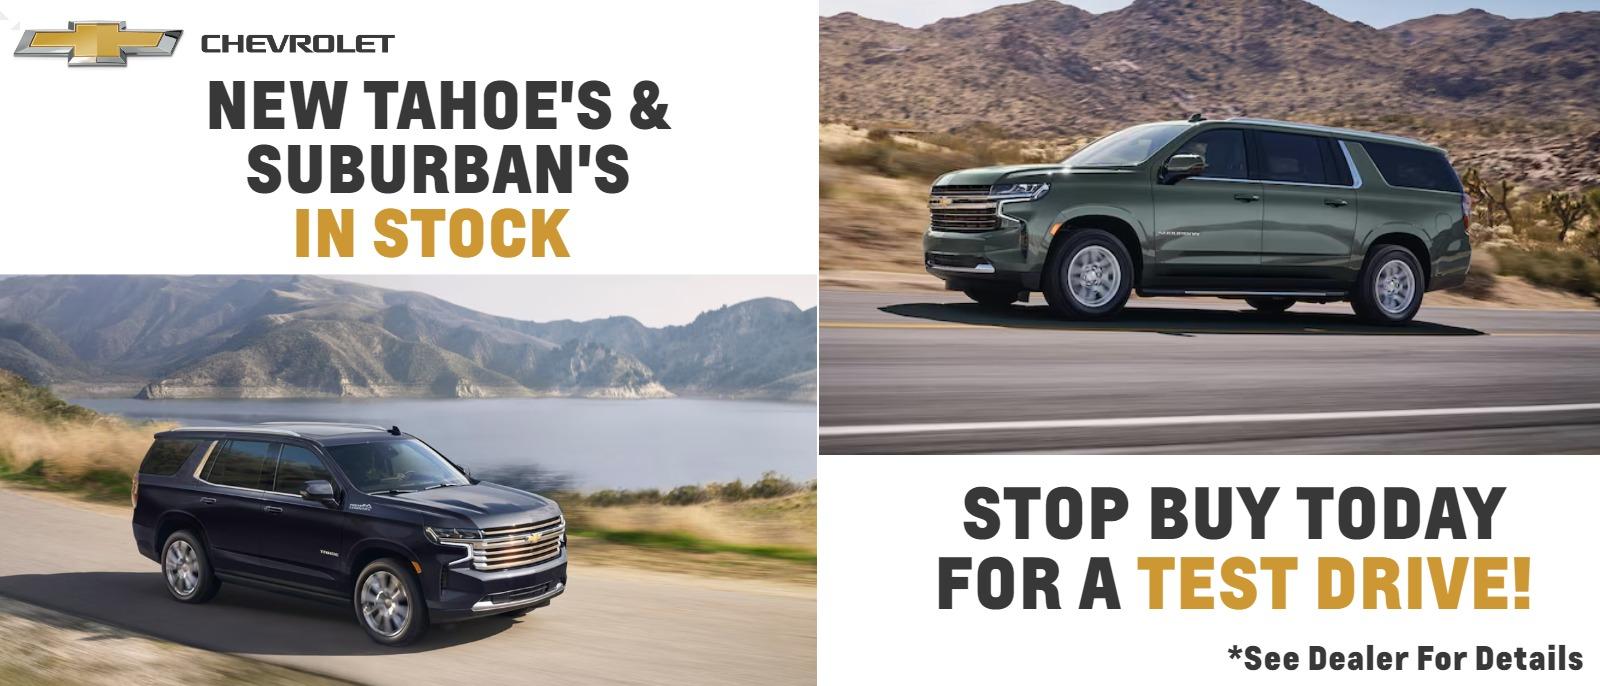 NEW TAHOE'S & SUBURBAN'S IN STOCK
STOP BUY TODAY FOR A TEST DRIVE!